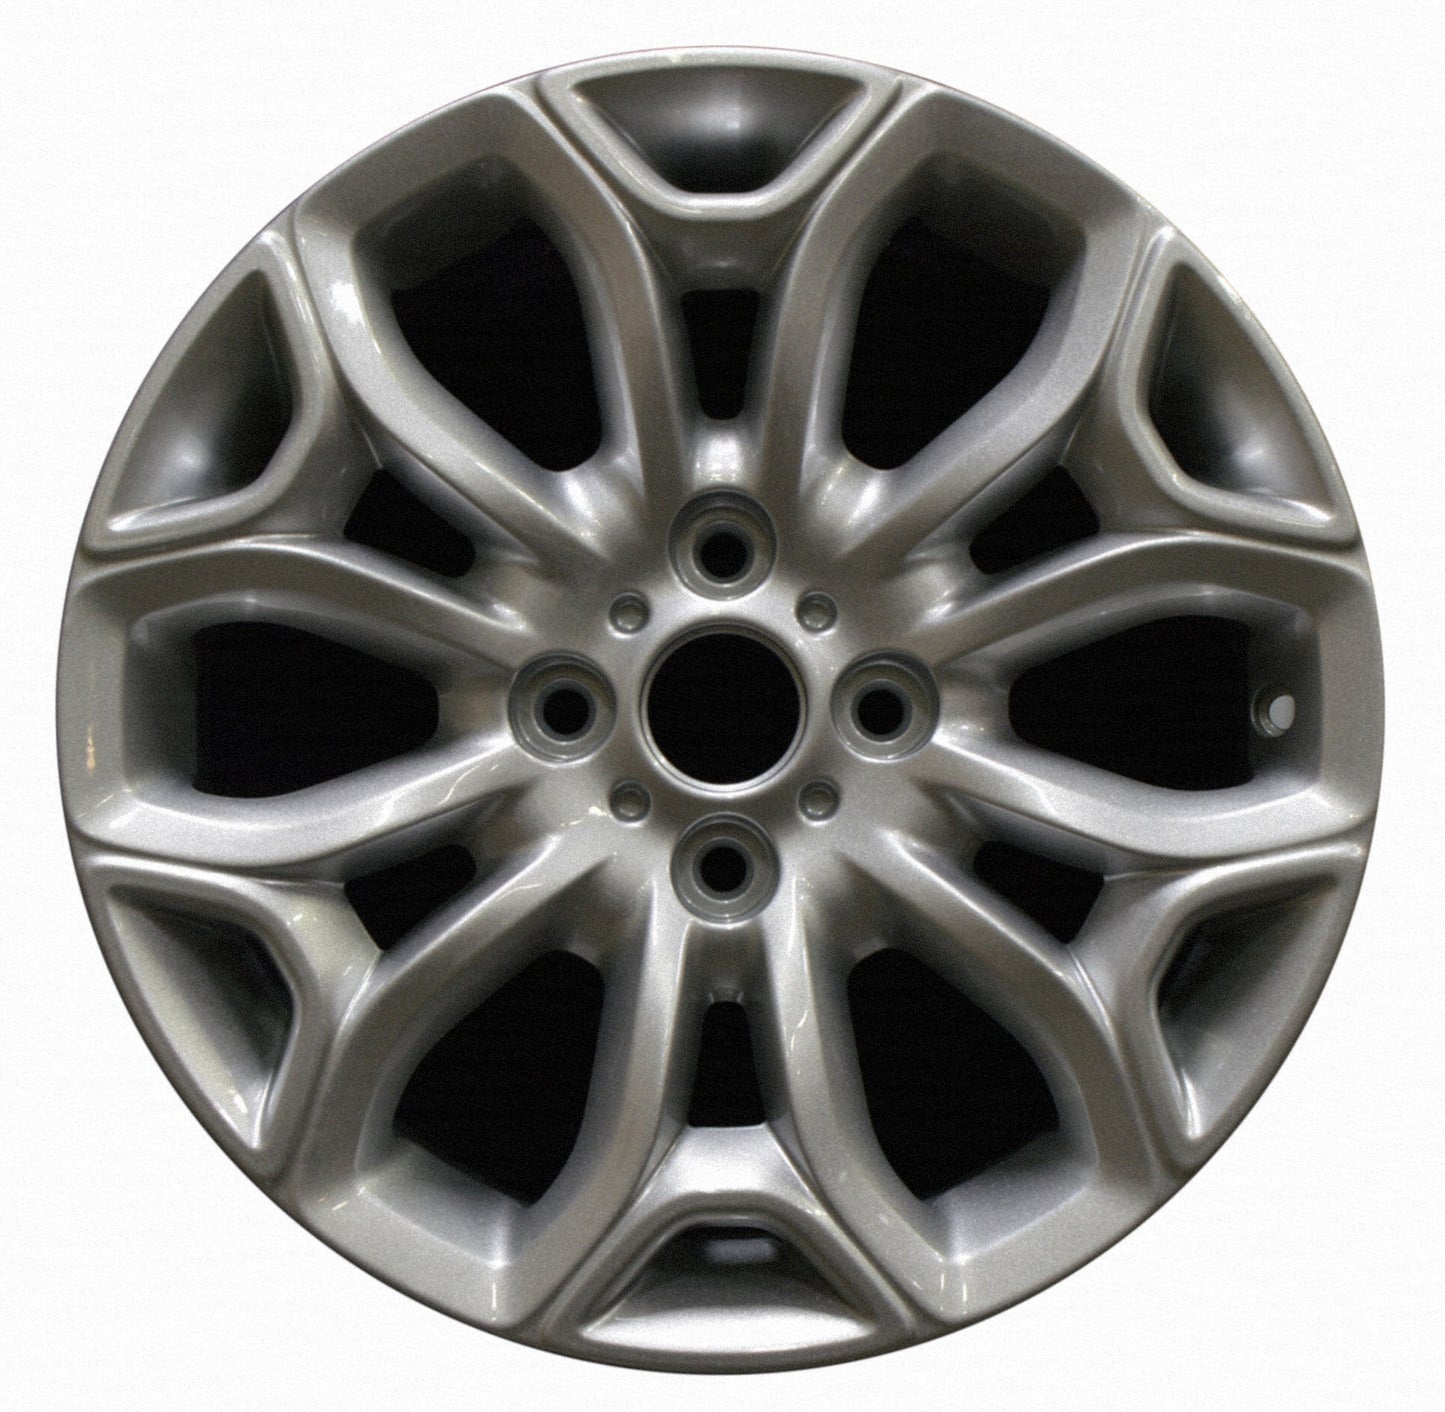 Ford Fiesta  2012, 2013, 2014, 2015 Factory OEM Car Wheel Size 16x6 Alloy WAO.160074.PS08.FF